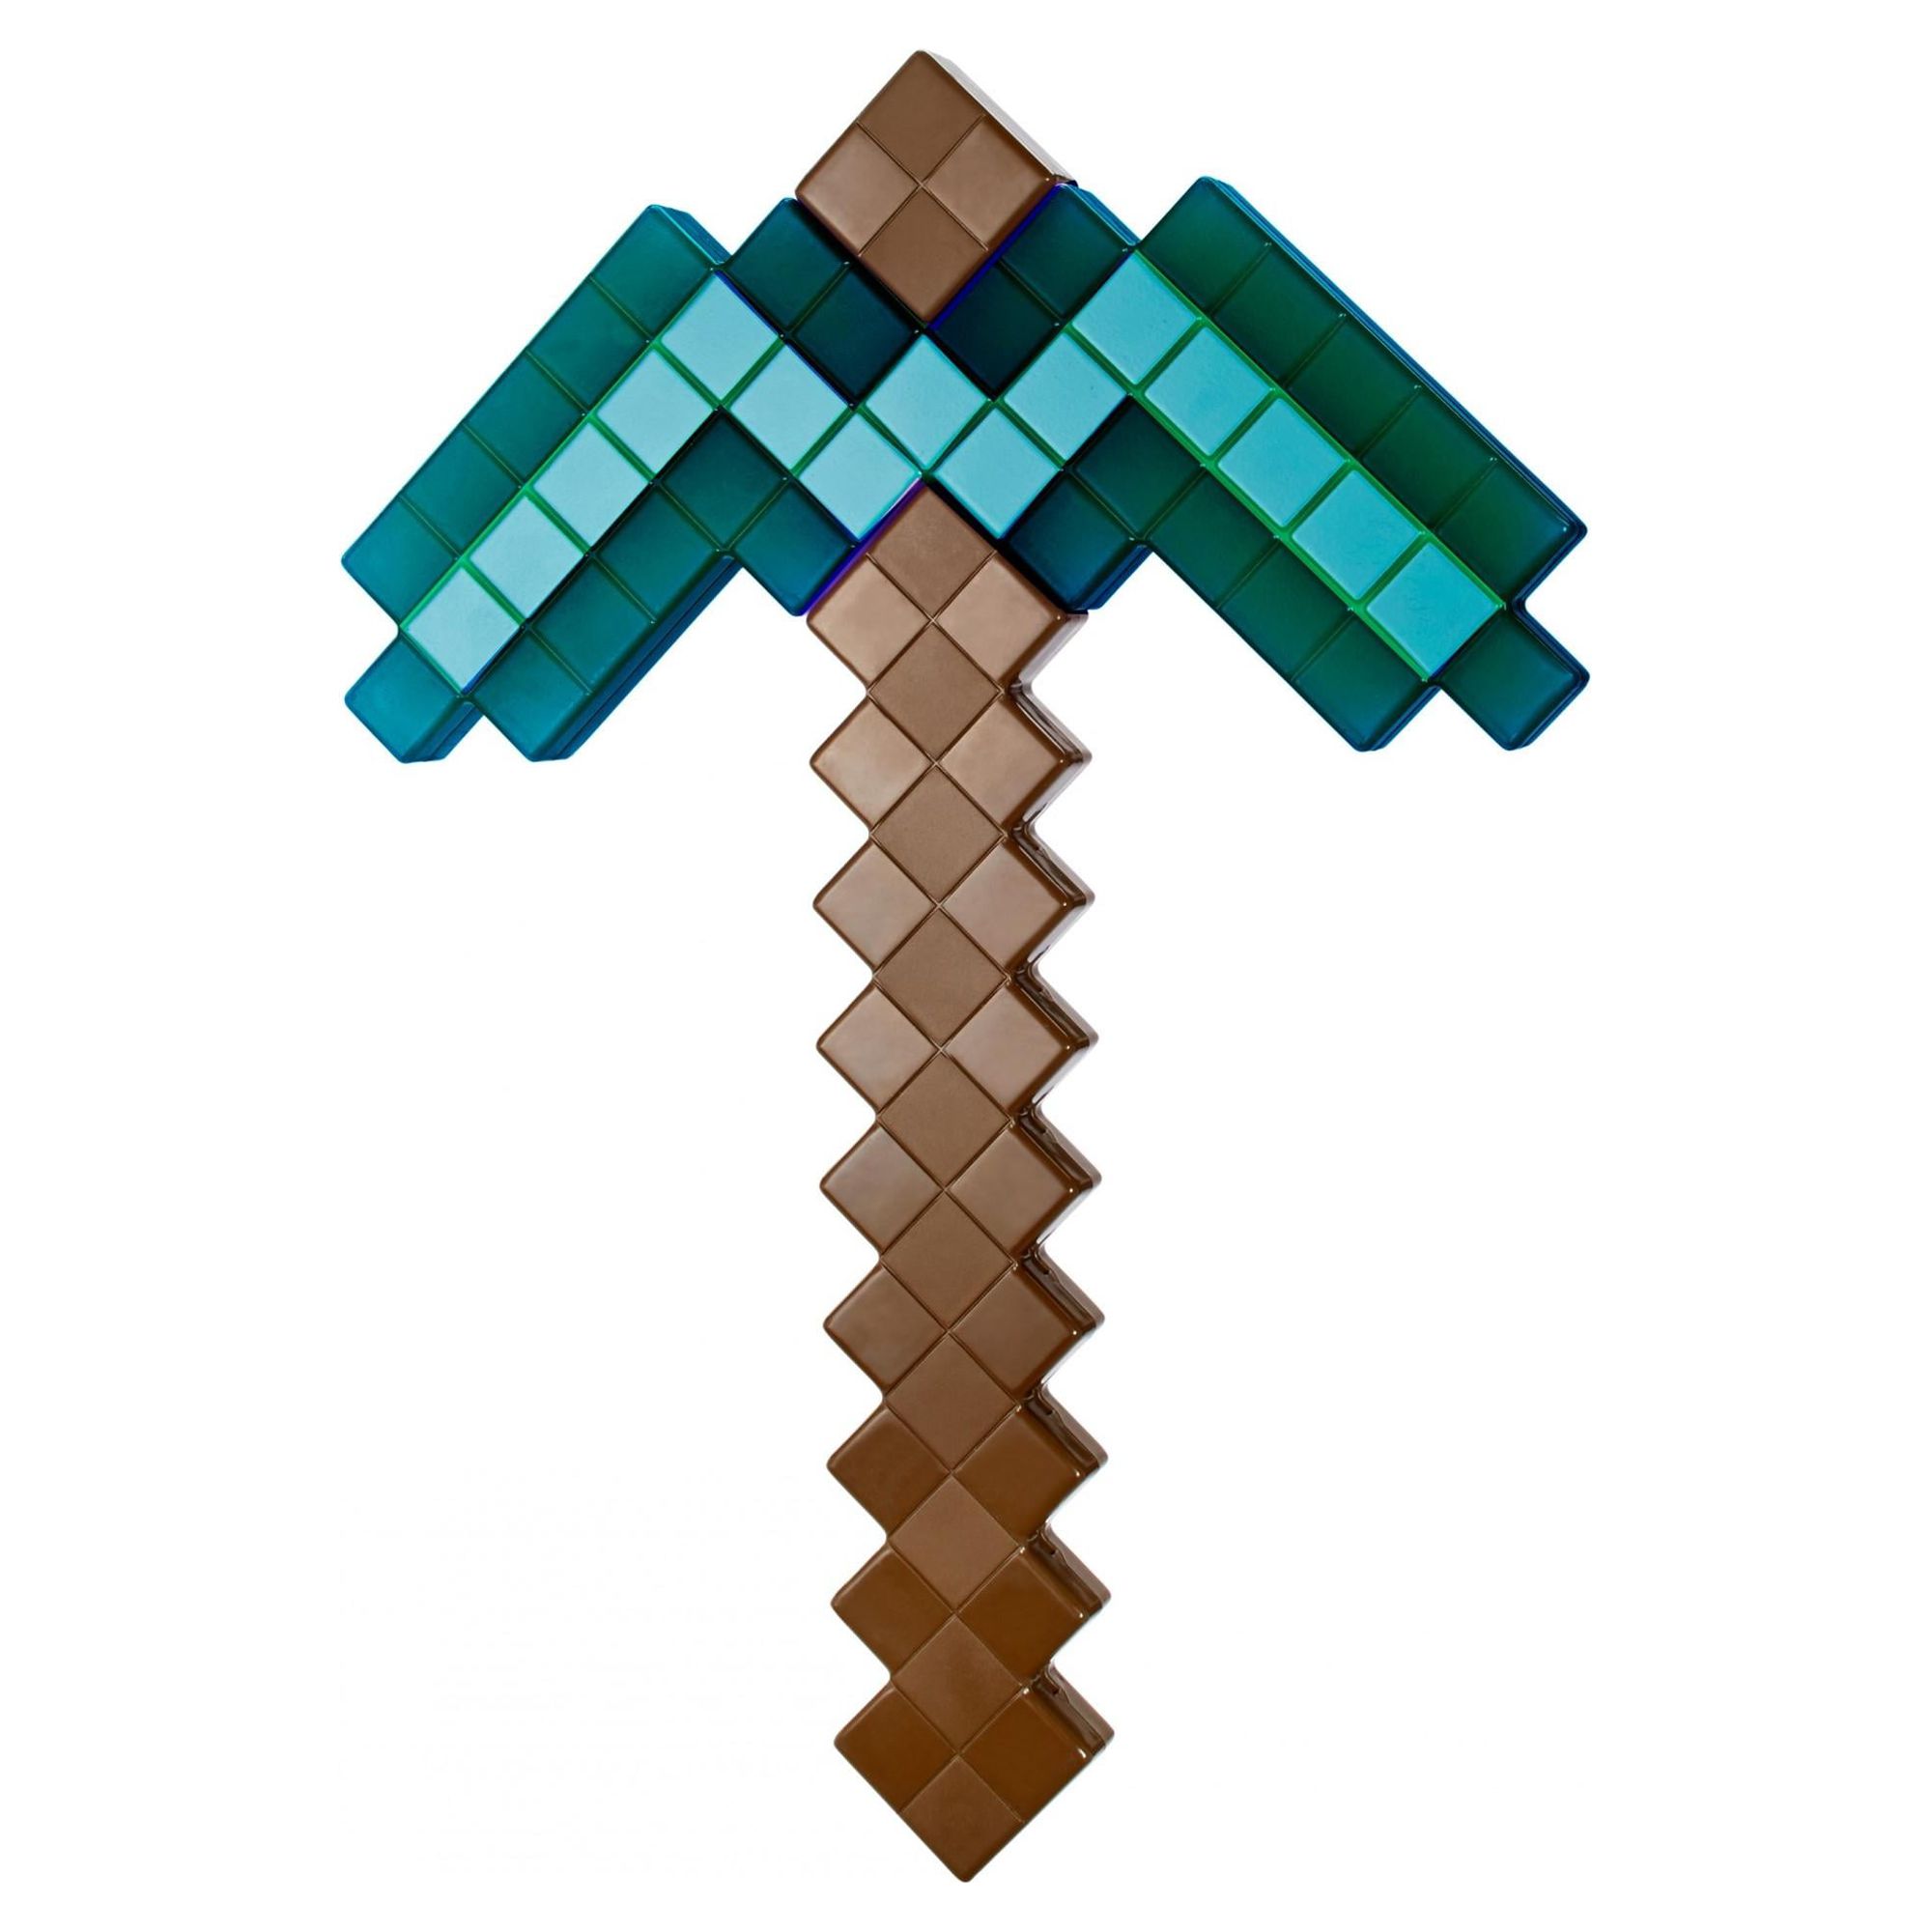 Minecraft Diamond Pickaxe, Life-Sized for Role-Play Fun - image 1 of 4